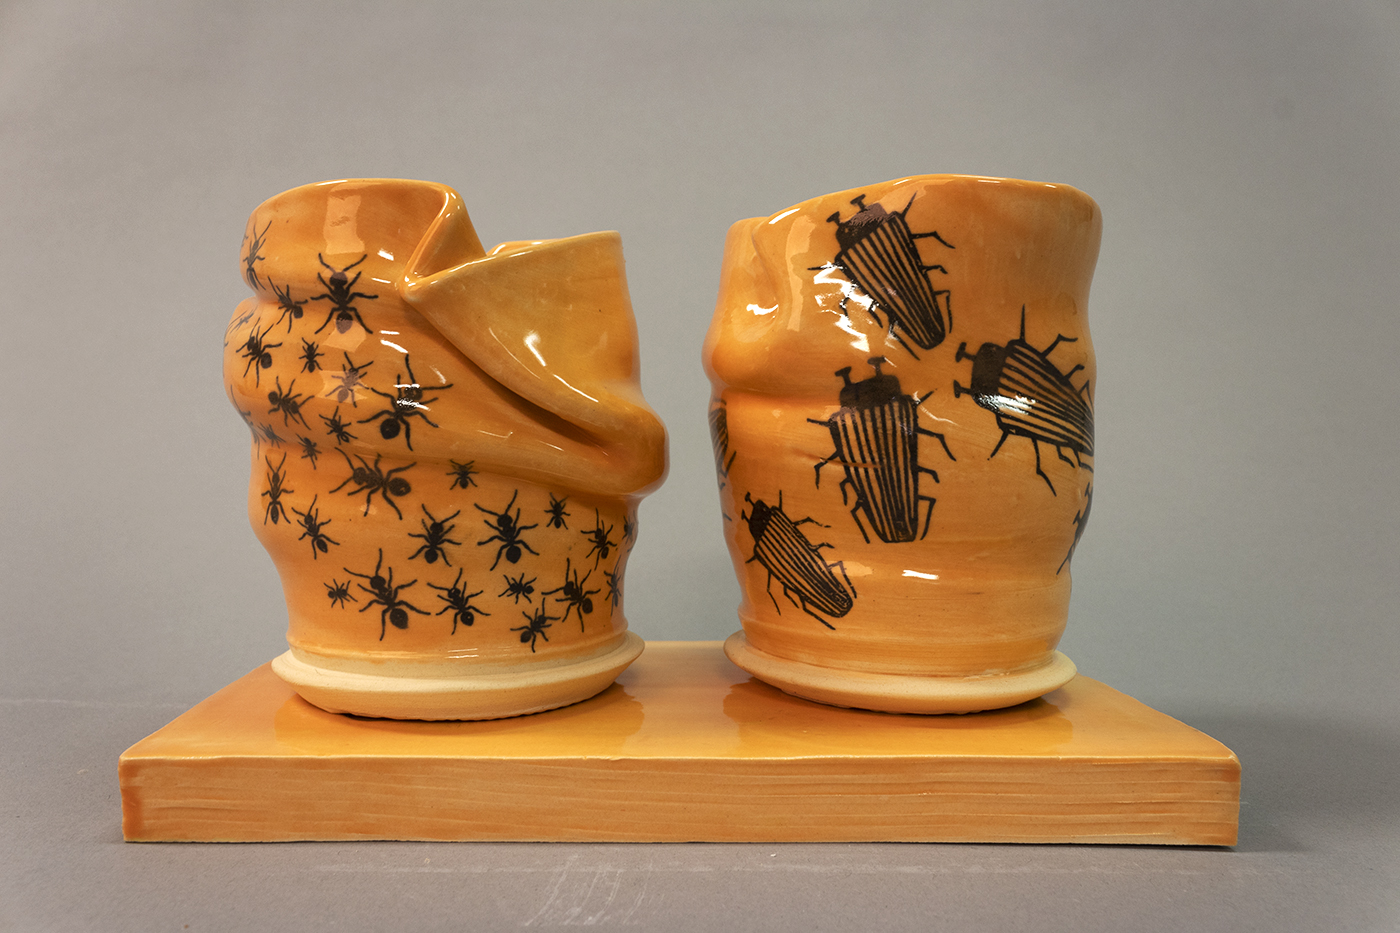 Two orange cups with beetles and ants sitting on a coordinating tray.